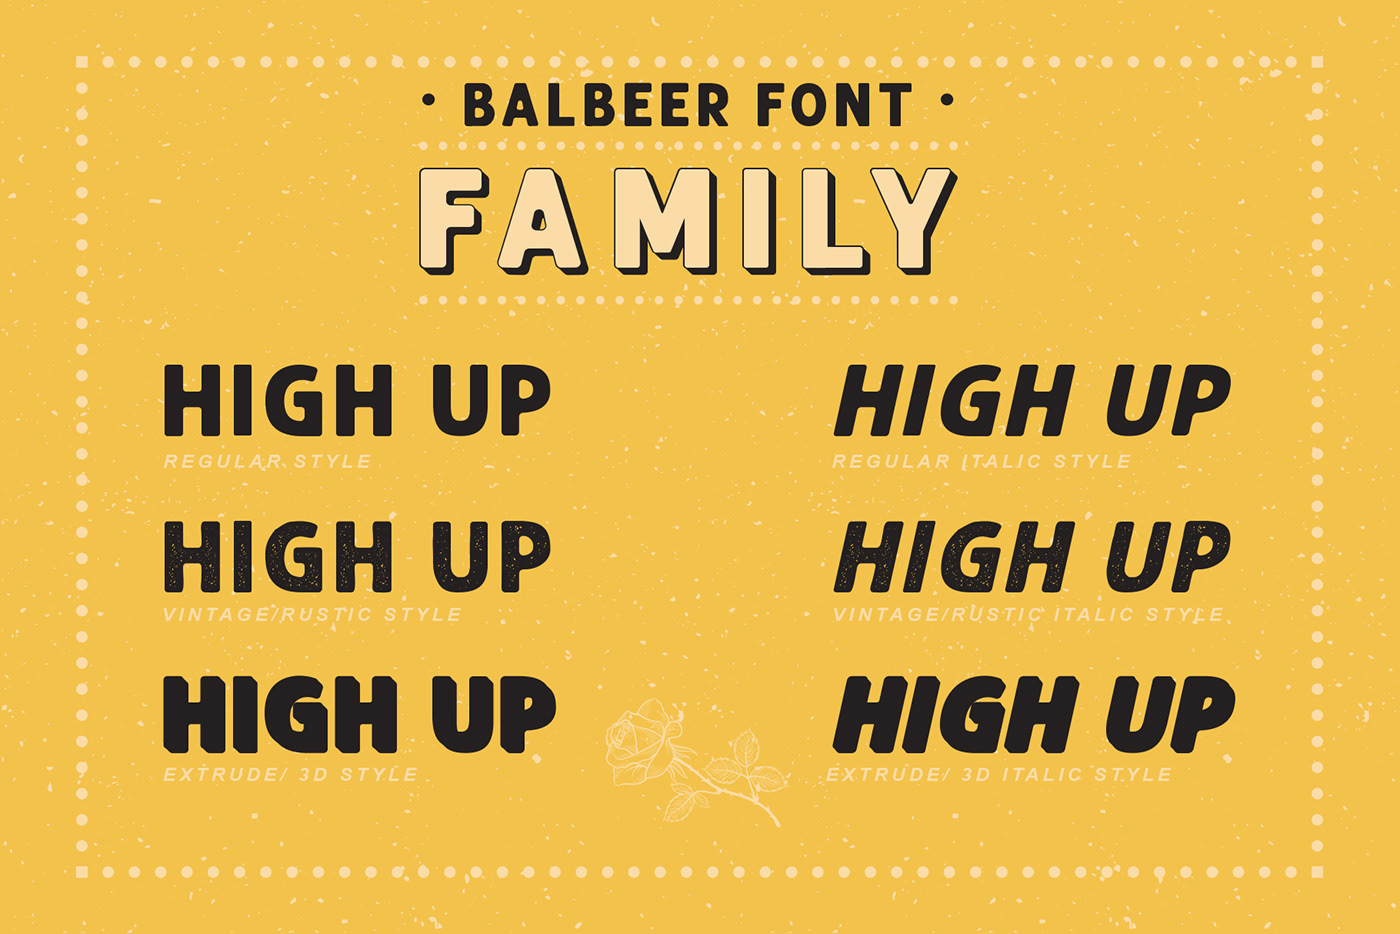 Шрифт beer. Beer font. Family шрифт рустик. Шрифт пиво. Шрифт Beer money.